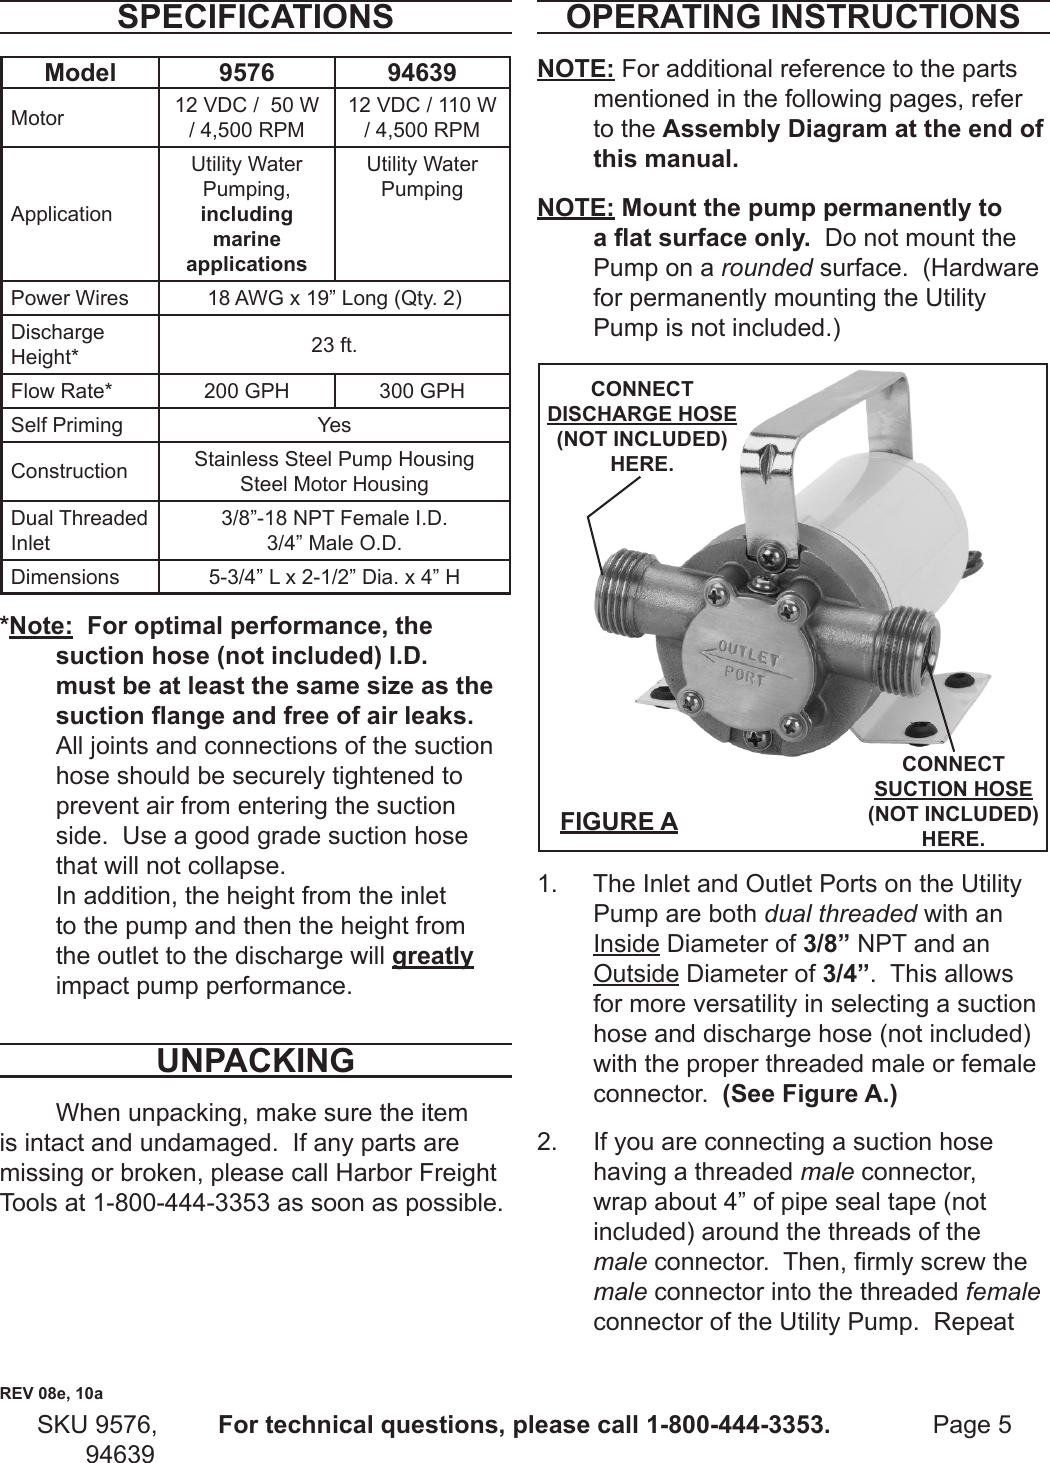 Page 5 of 8 - Harbor-Freight Harbor-Freight-12-Volt-Marine-Utility-Pump-Product-Manual-  Harbor-freight-12-volt-marine-utility-pump-product-manual